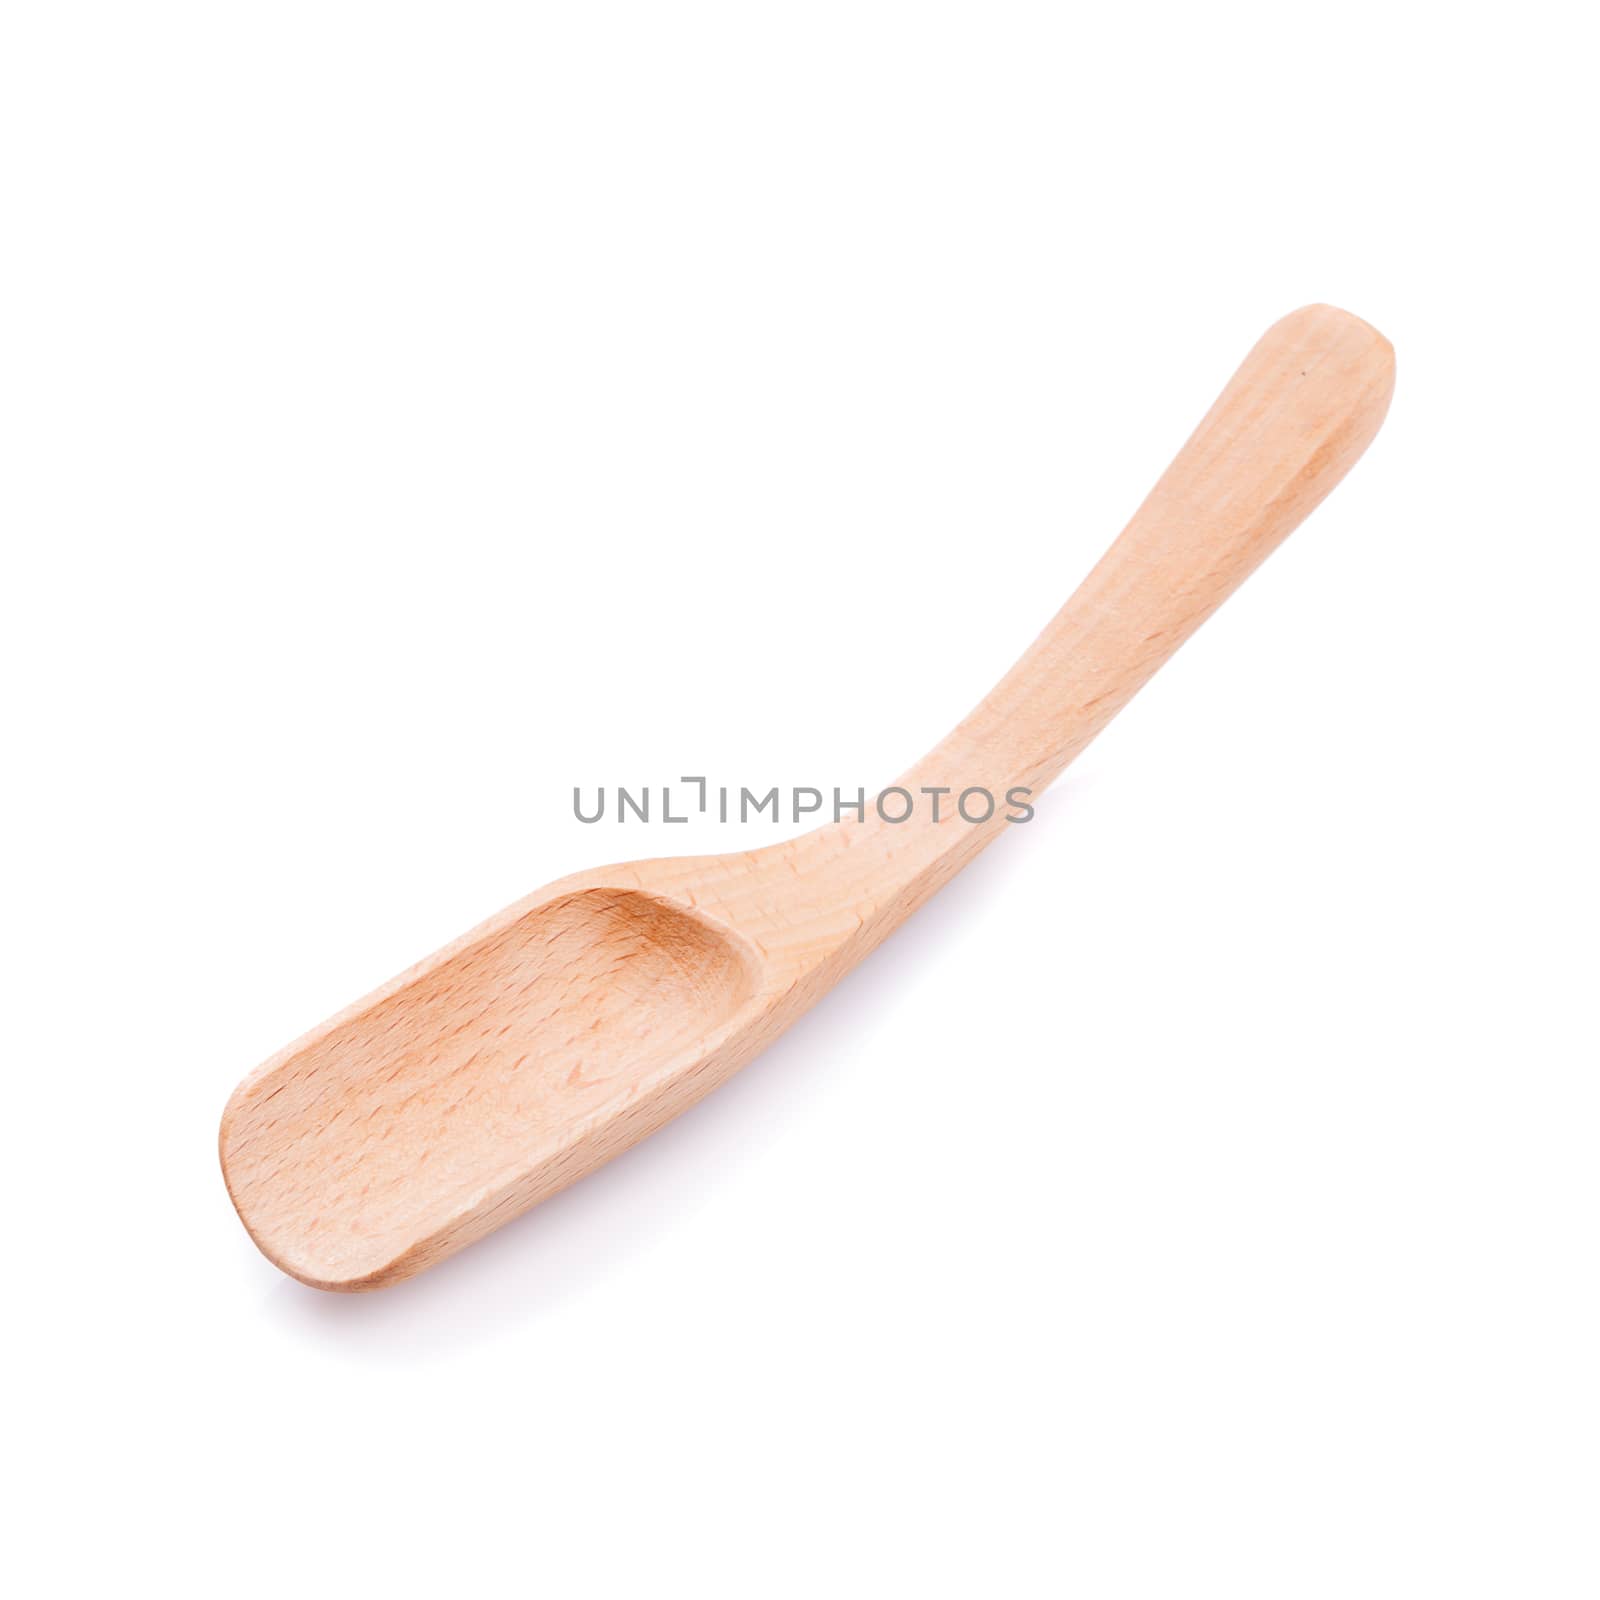 Wooden spoon on a white background by kaiskynet